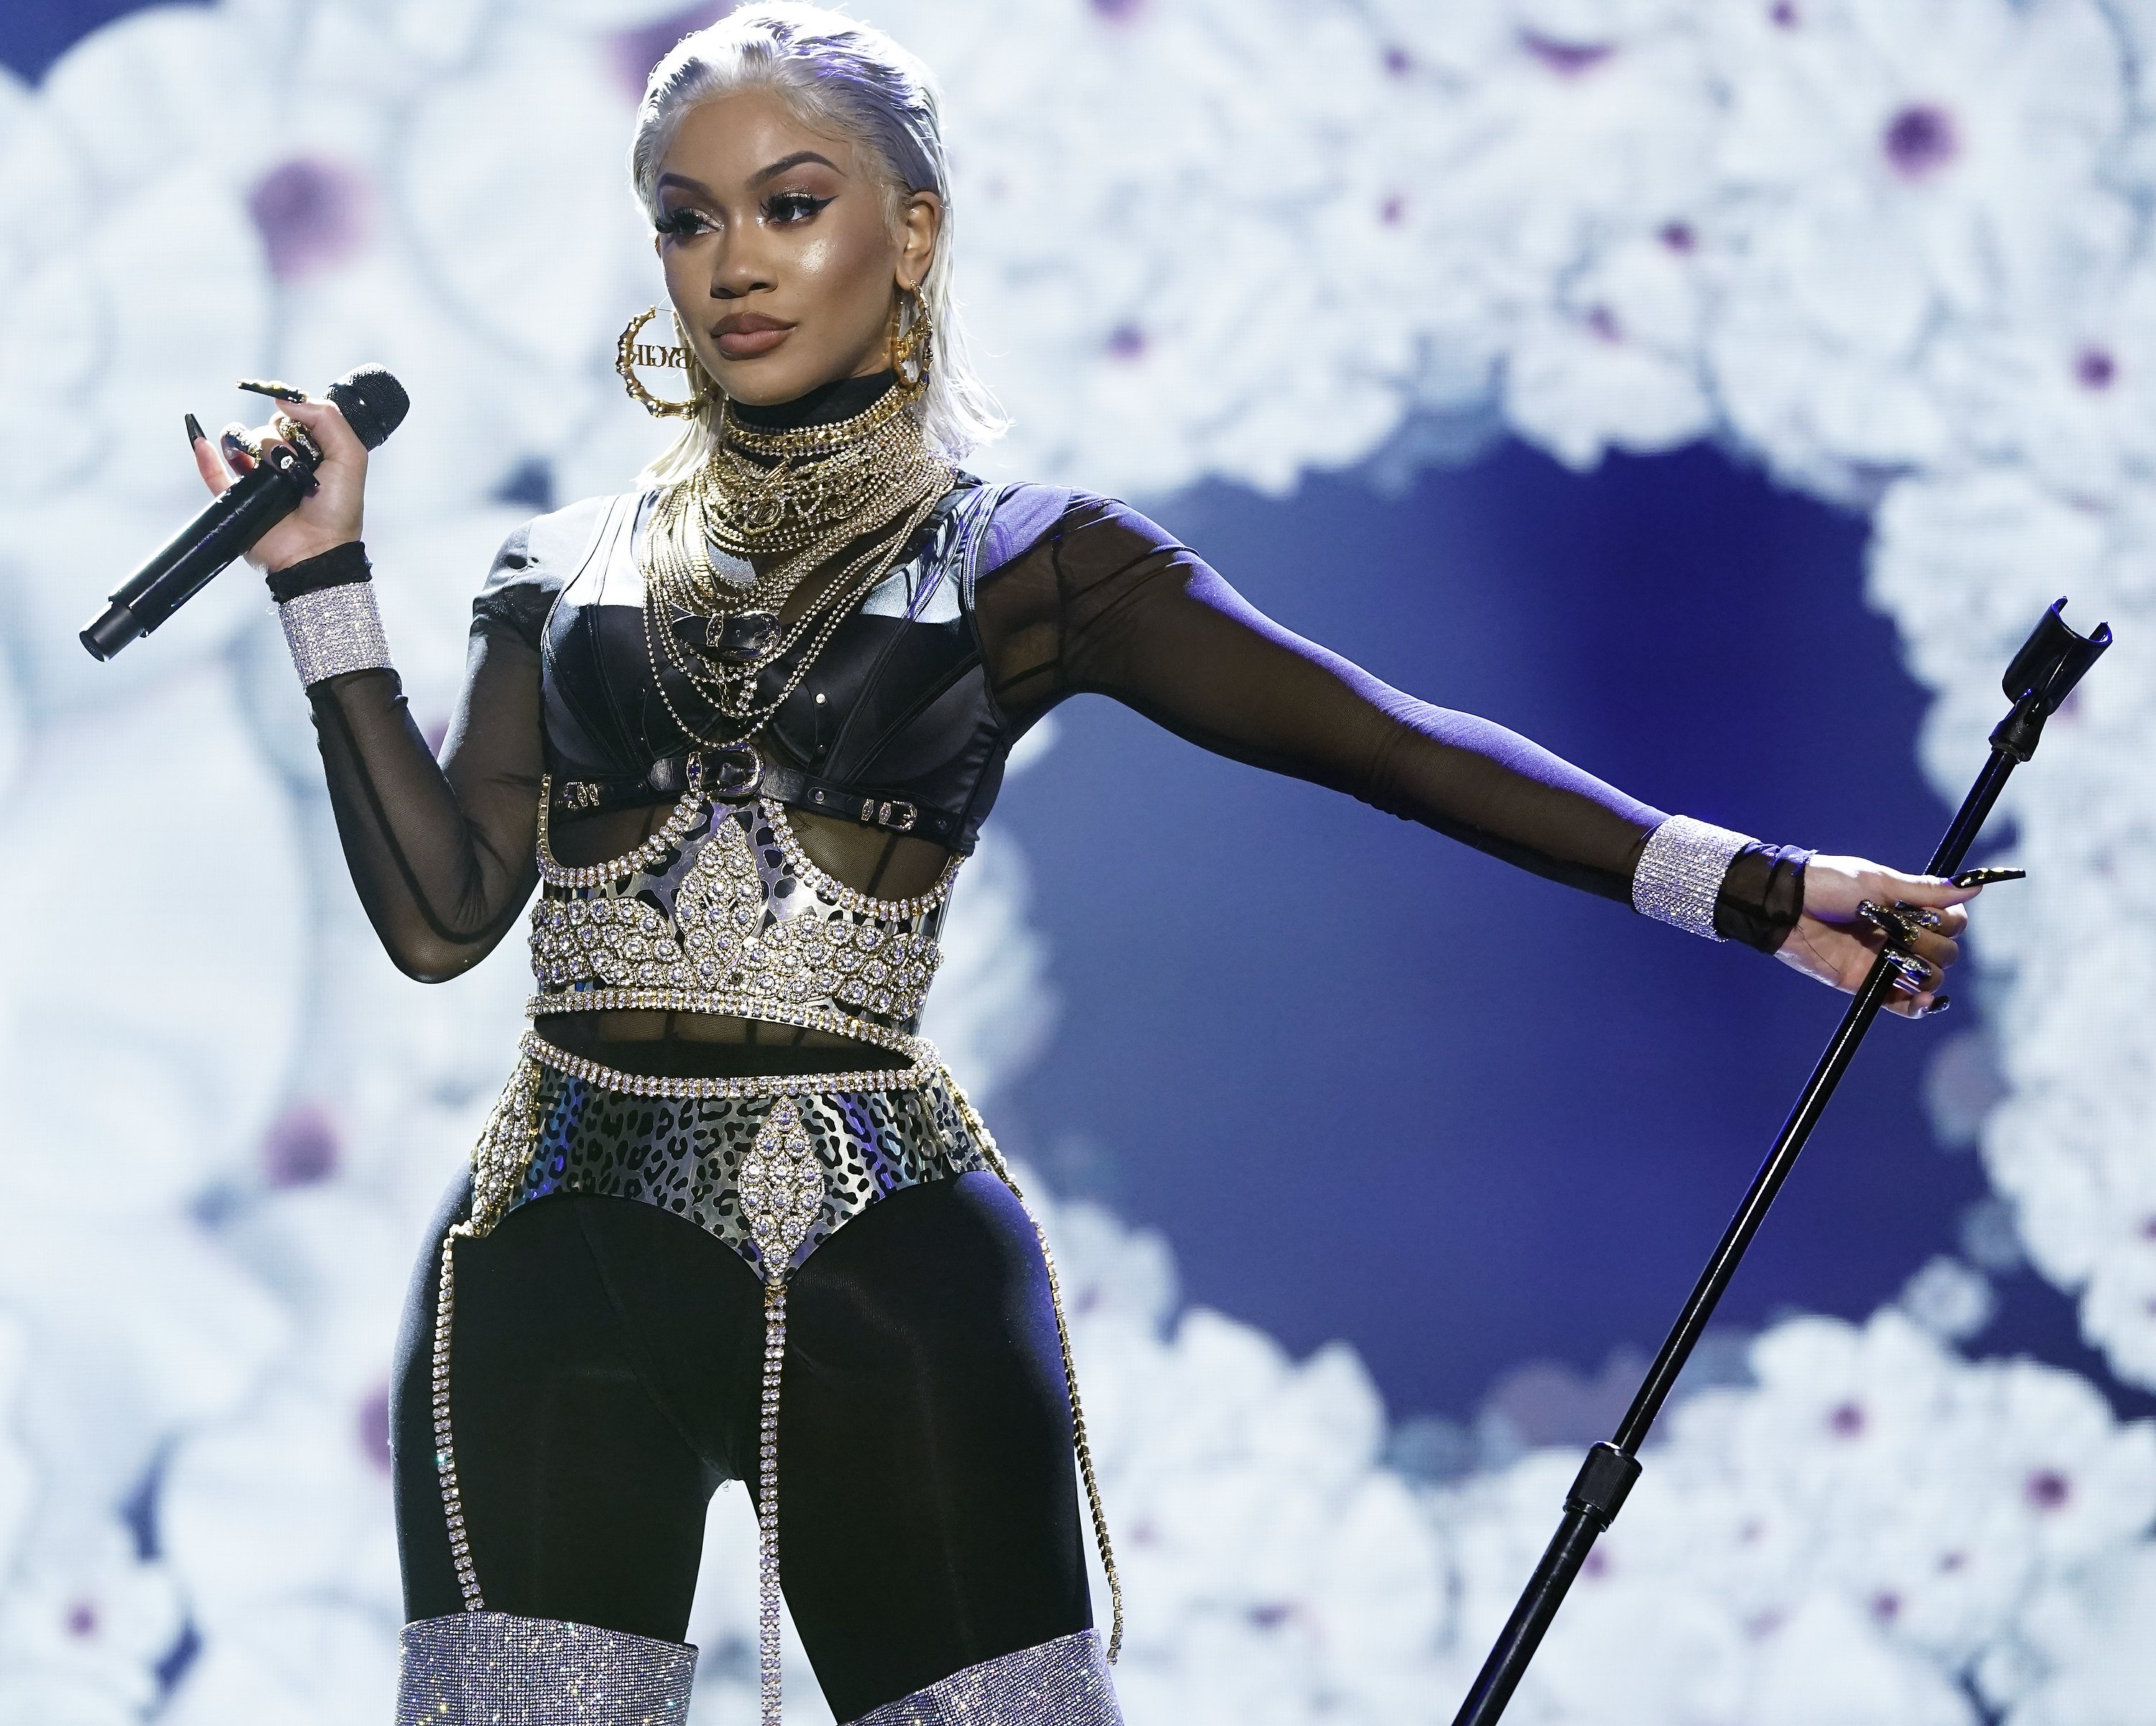 Saweetie performing at Dick Clarks "New Years Rockin Eve with Ryan Seacrest 2021" | Photo: Getty Images